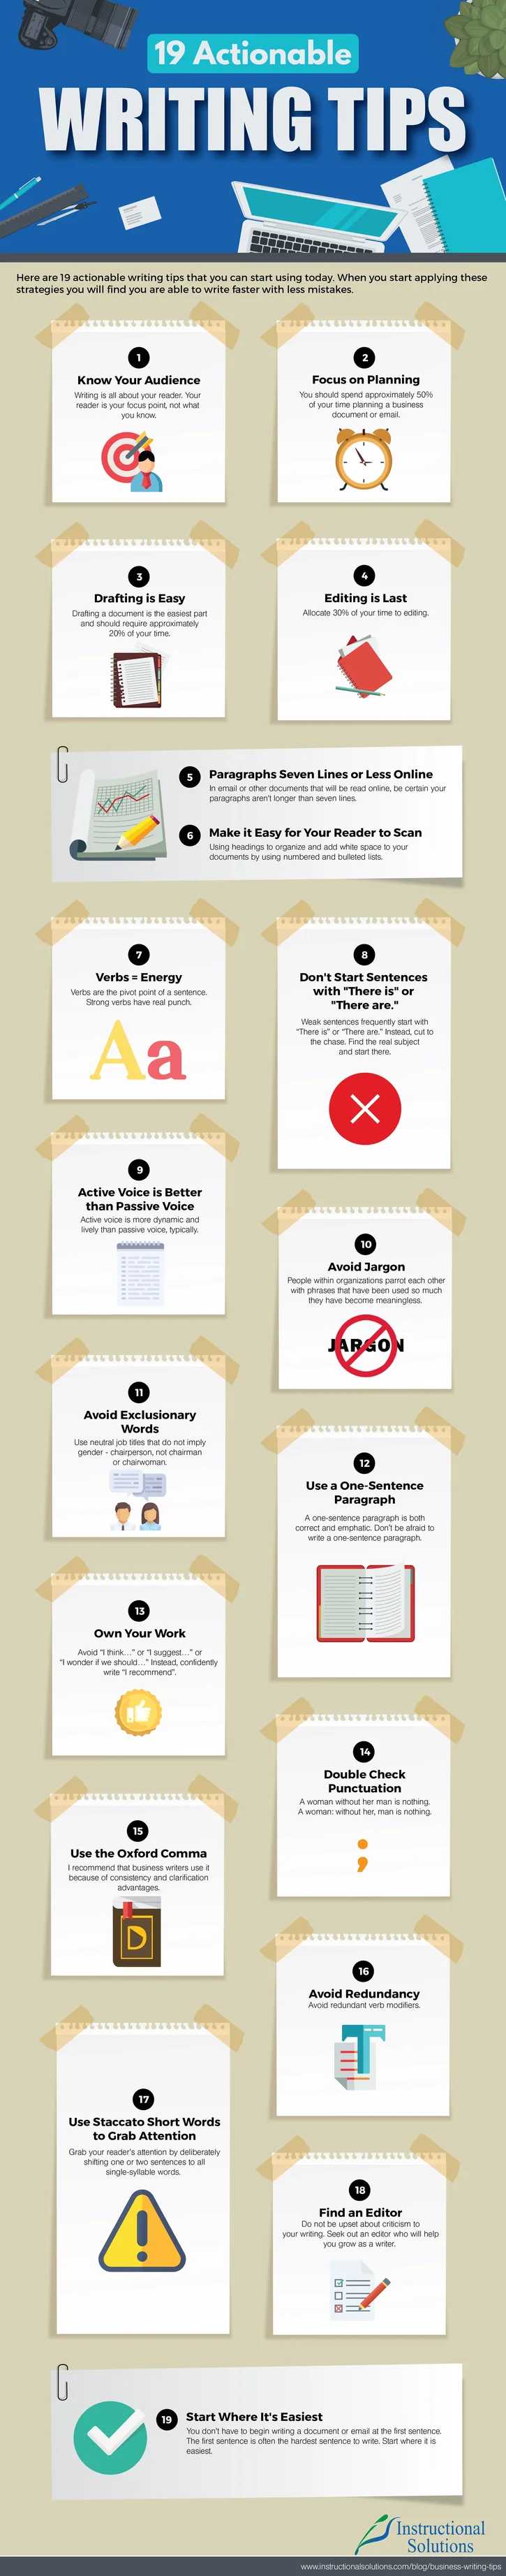 19-Writing-Tips-Infographic-by-Instructional-Solutions